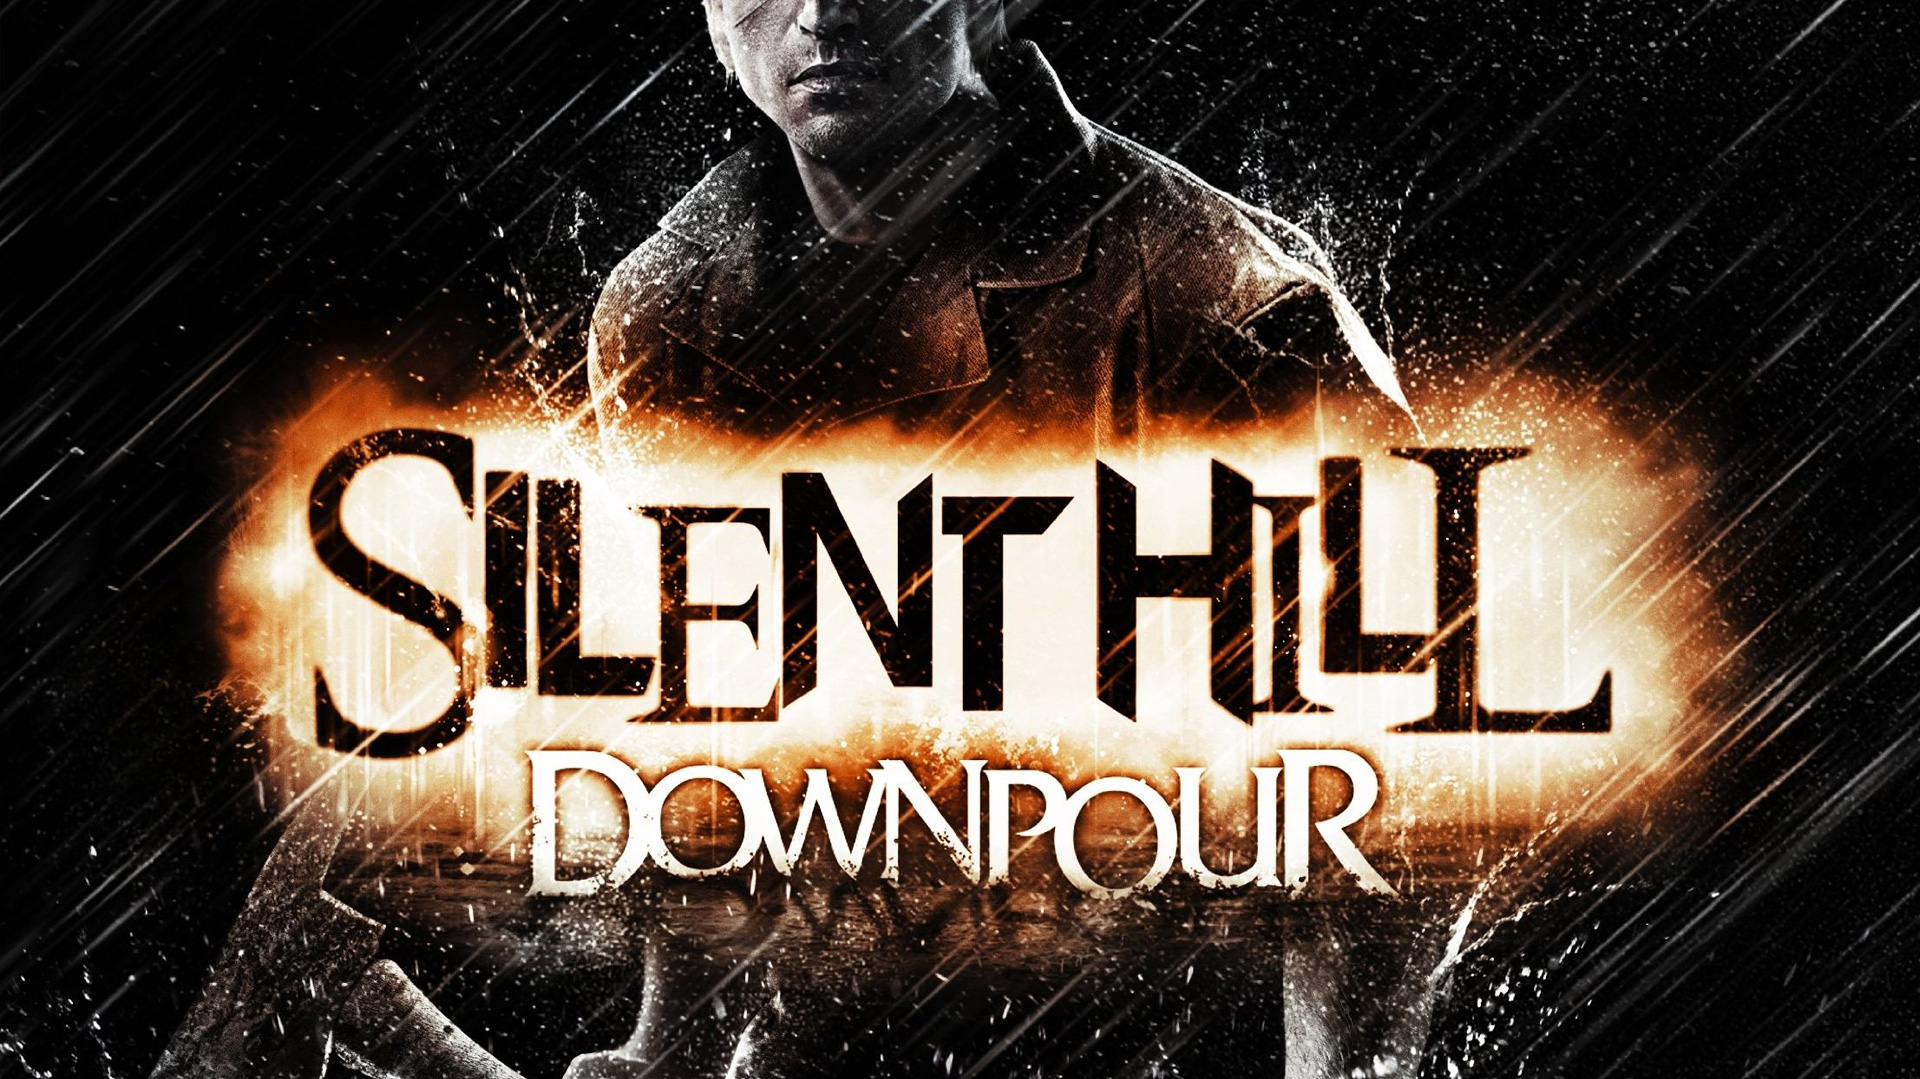 Silent Hill Downpour Wallpaper In HD